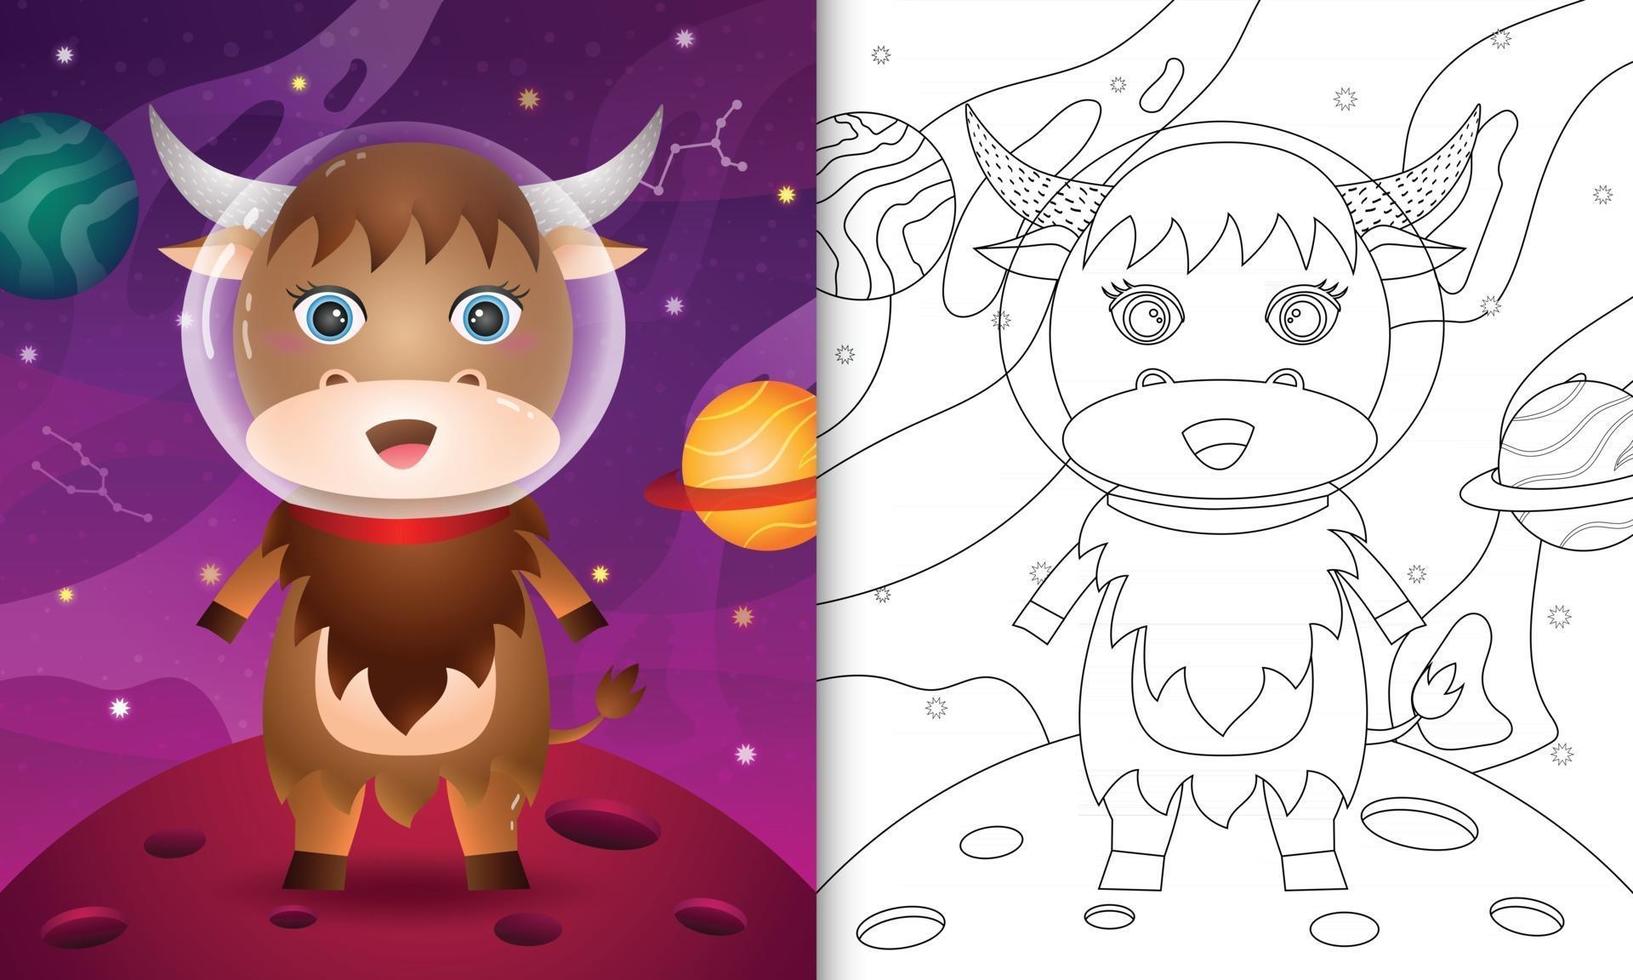 coloring book for kids with a cute buffalo in the space galaxy vector